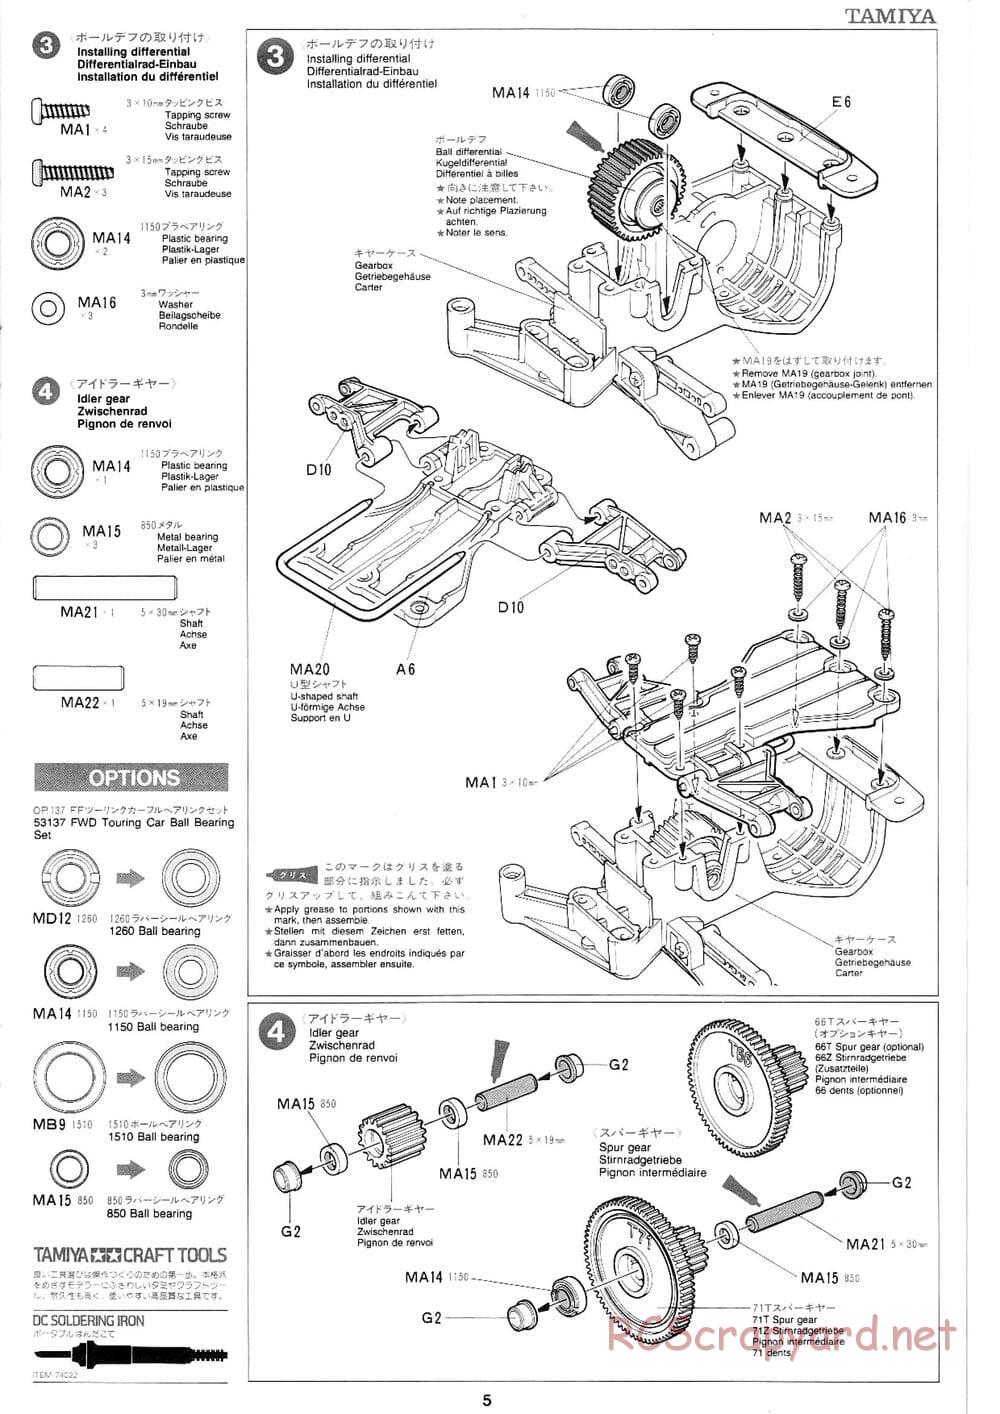 Tamiya - Volkswagen New Beetle - FF-01 Chassis - Manual - Page 3